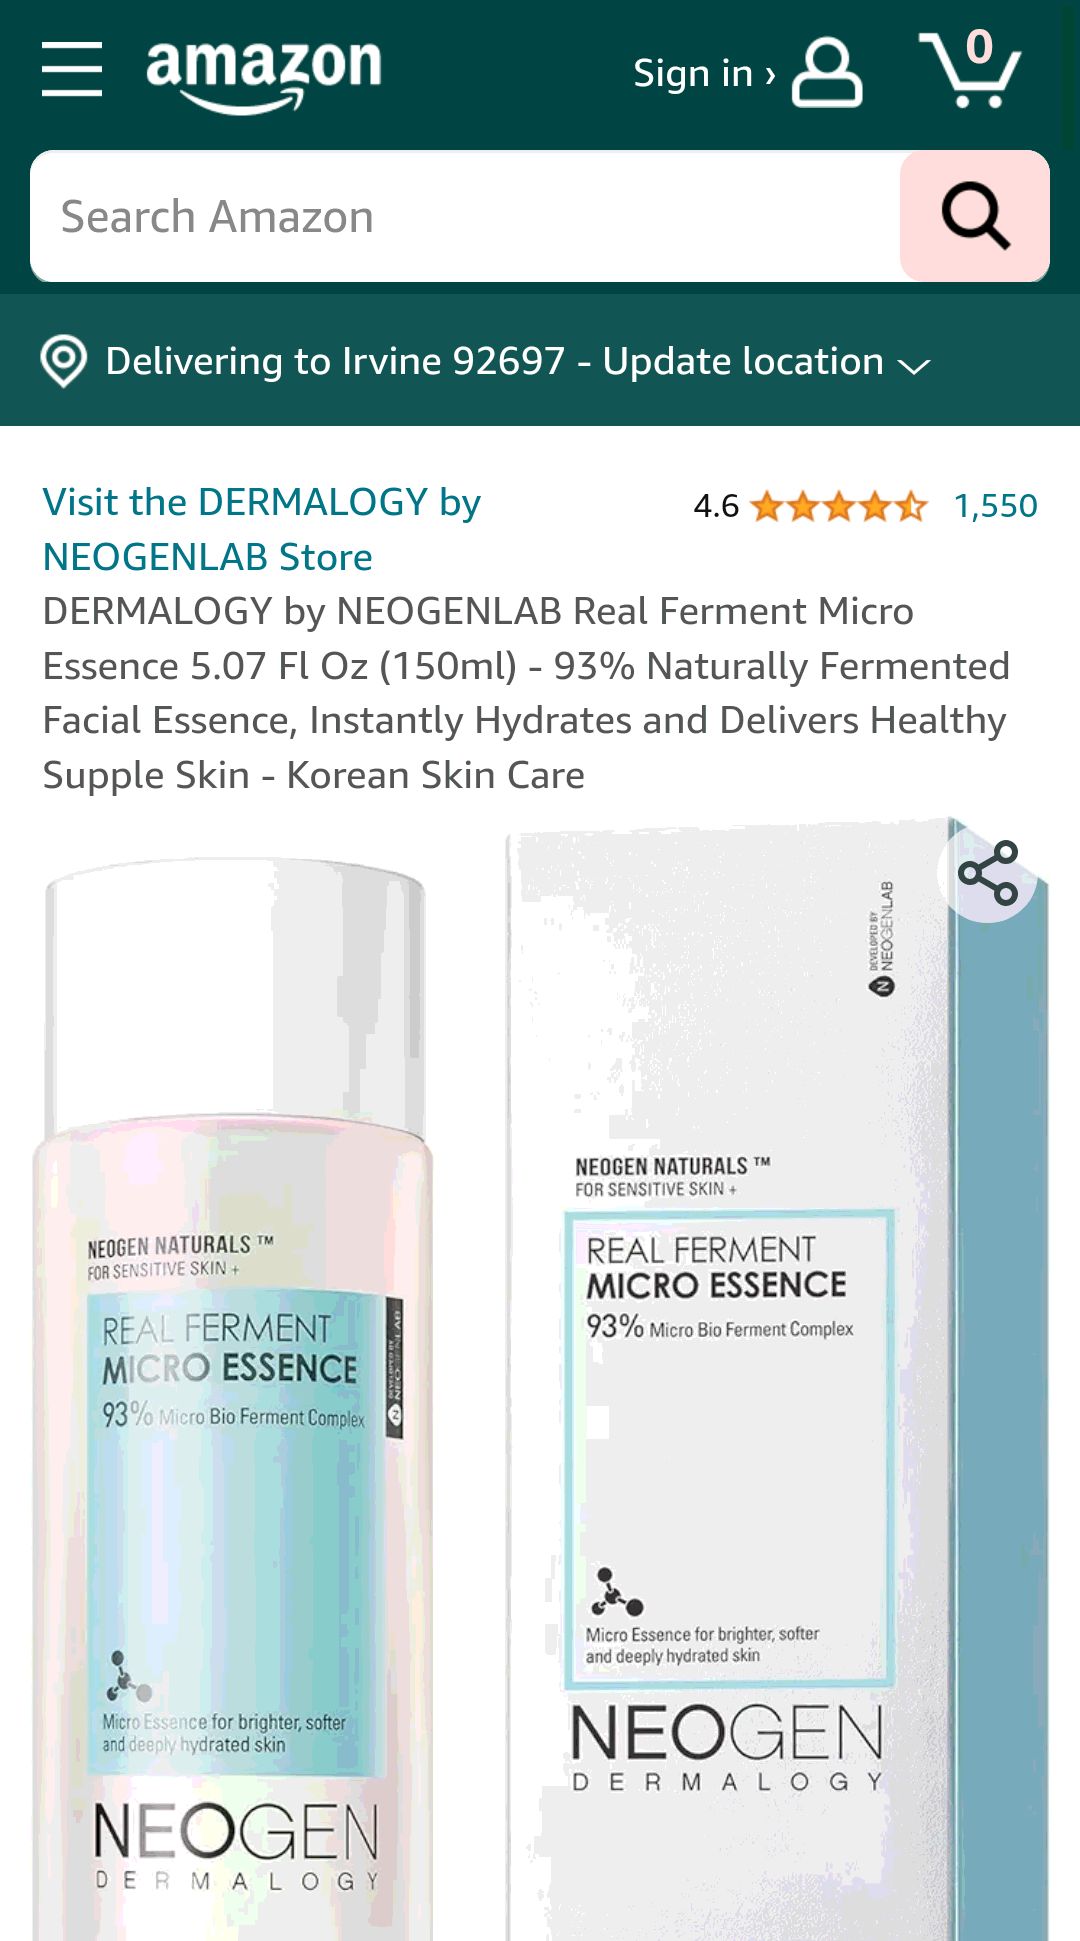 DERMALOGY by NEOGENLAB Real Ferment Micro Essence 5.07 Fl Oz (150ml) - 93% Naturally Fermented Facial Essence, Instantly Hydrates and Delivers Healthy Supple Skin - Korean Skin Care : Beauty & Persona